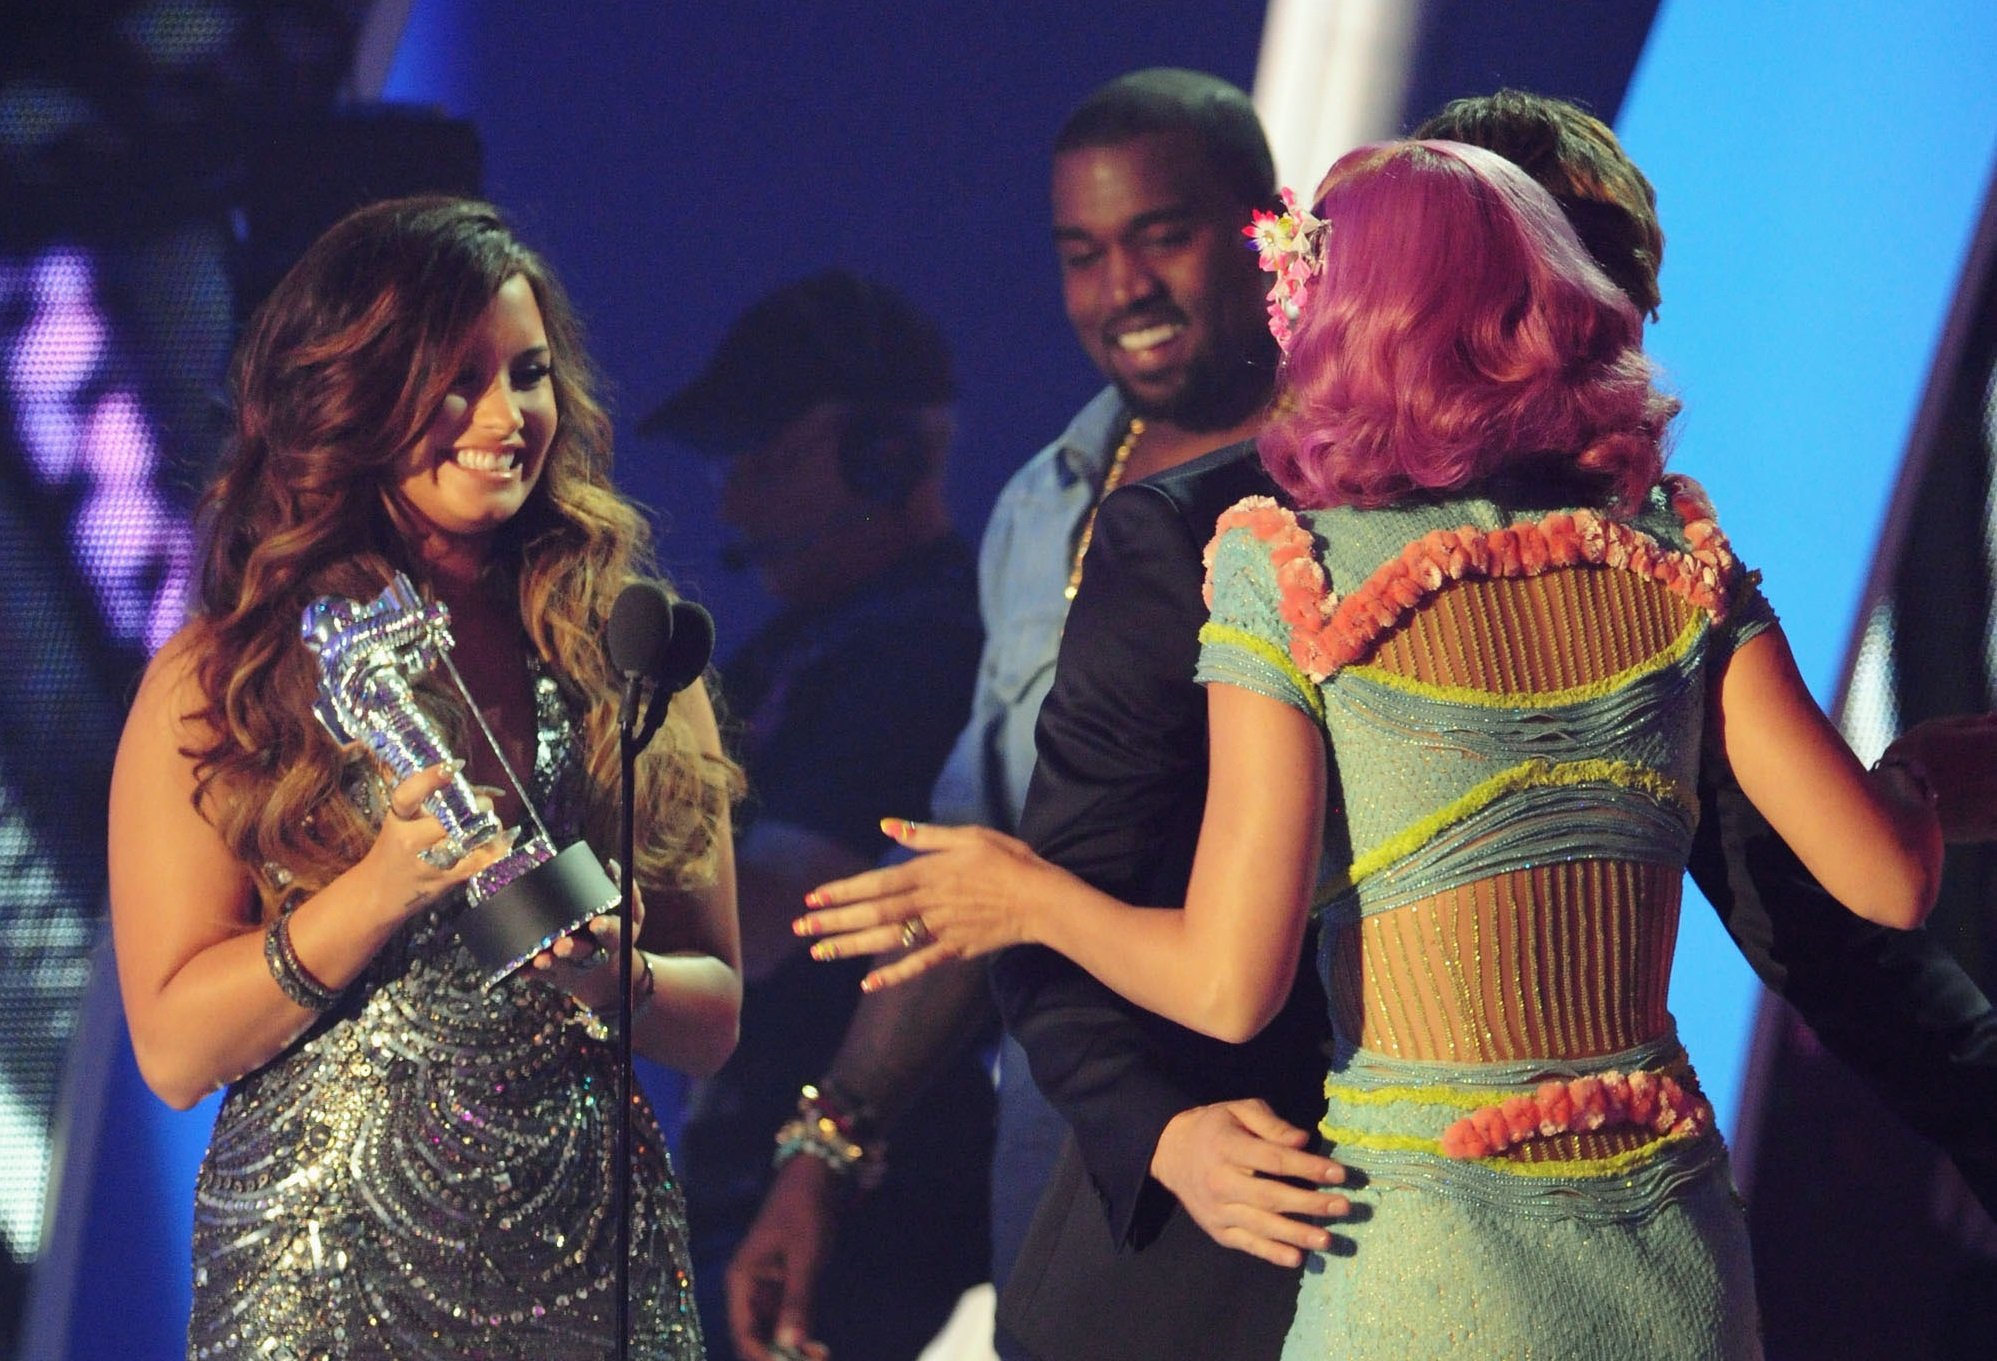 Singers Kanye West, Demi Lovato and Katy Perry speak onstage during the 2011 MTV Video Music Awards at Nokia Theatre L.A. Live on August 28, 2011 in Los Angeles, California.